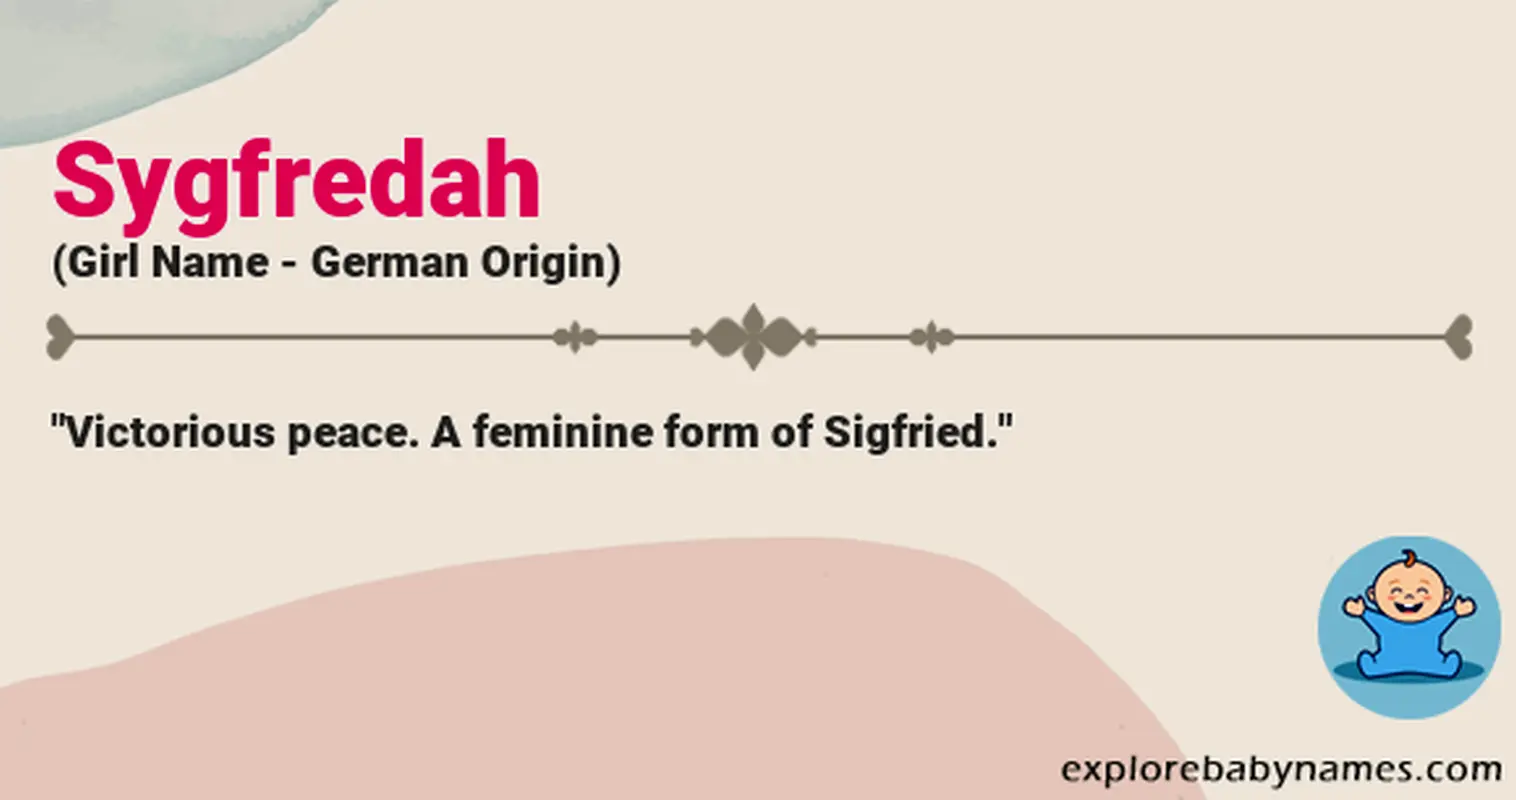 Meaning of Sygfredah